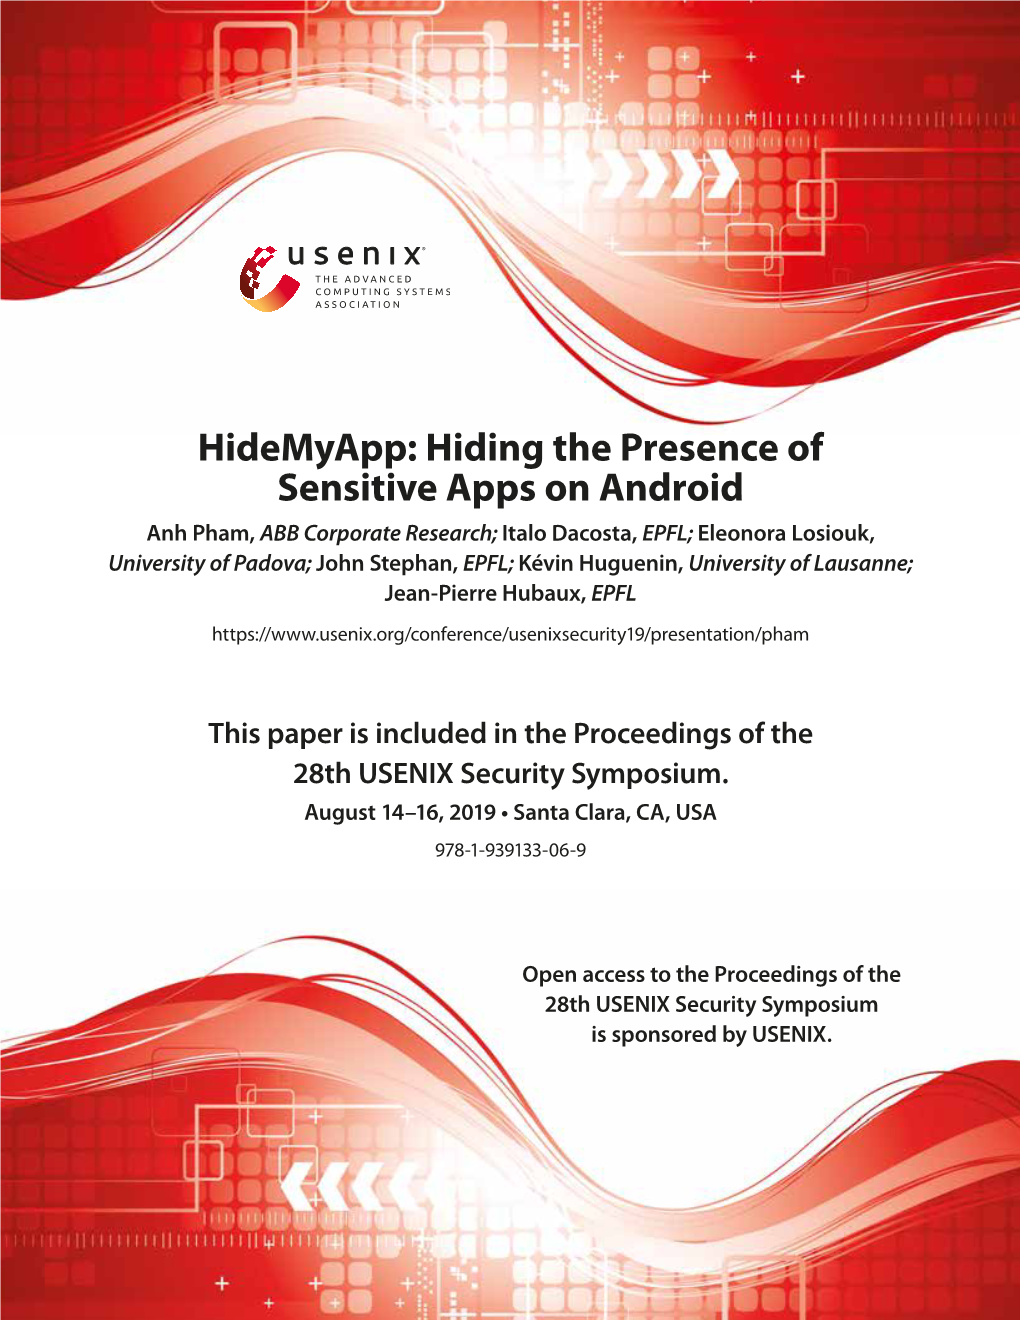 Hiding the Presence of Sensitive Apps on Android